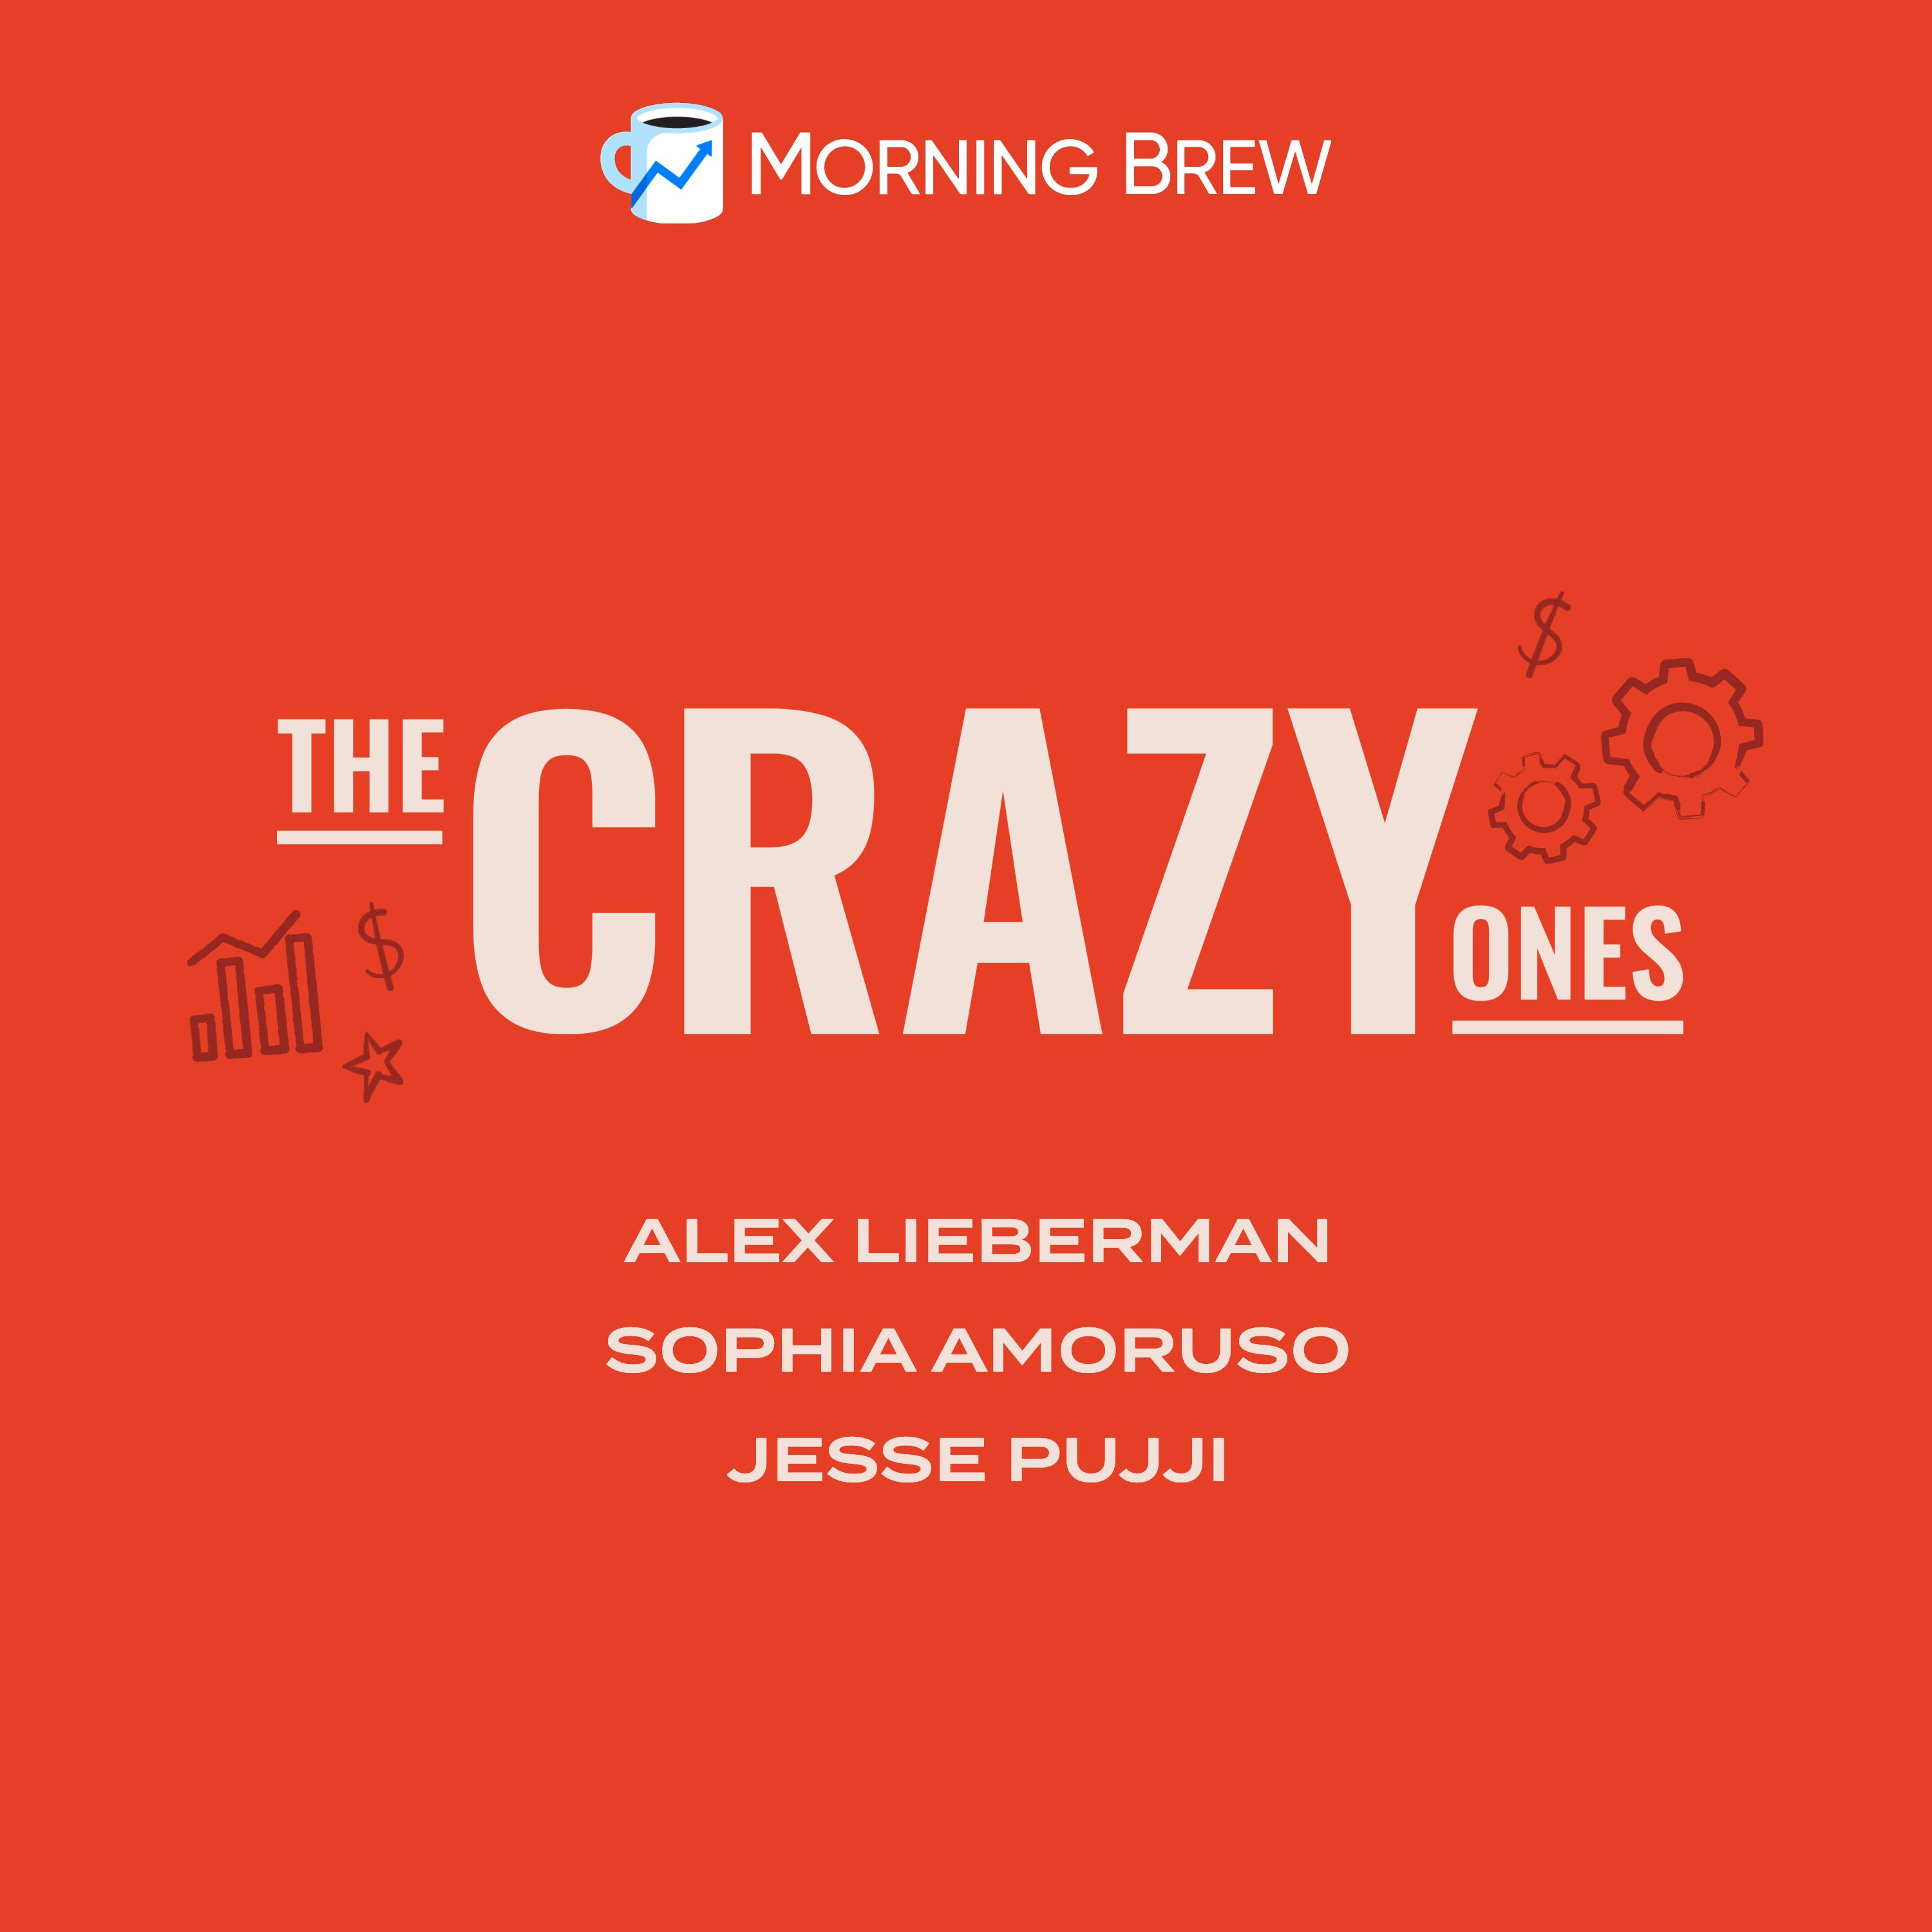 Introducing: The Crazy Ones, Morning Brew's New Podcast